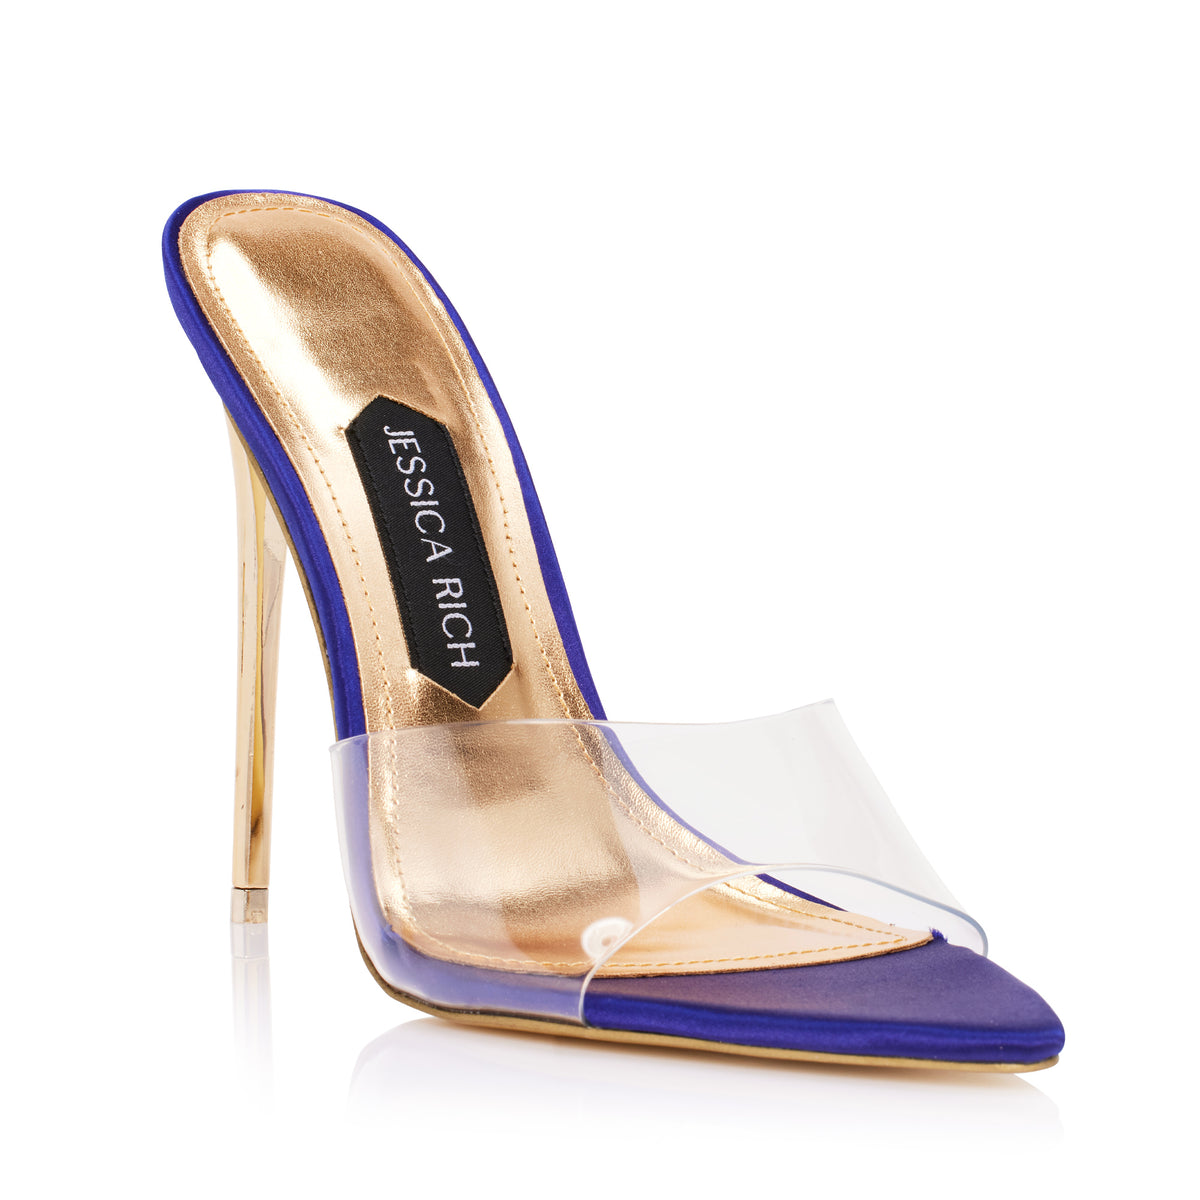 View of the satin purple Racy Mule high heels from luxury women’s shoe brand Jessica Rich from an angle.